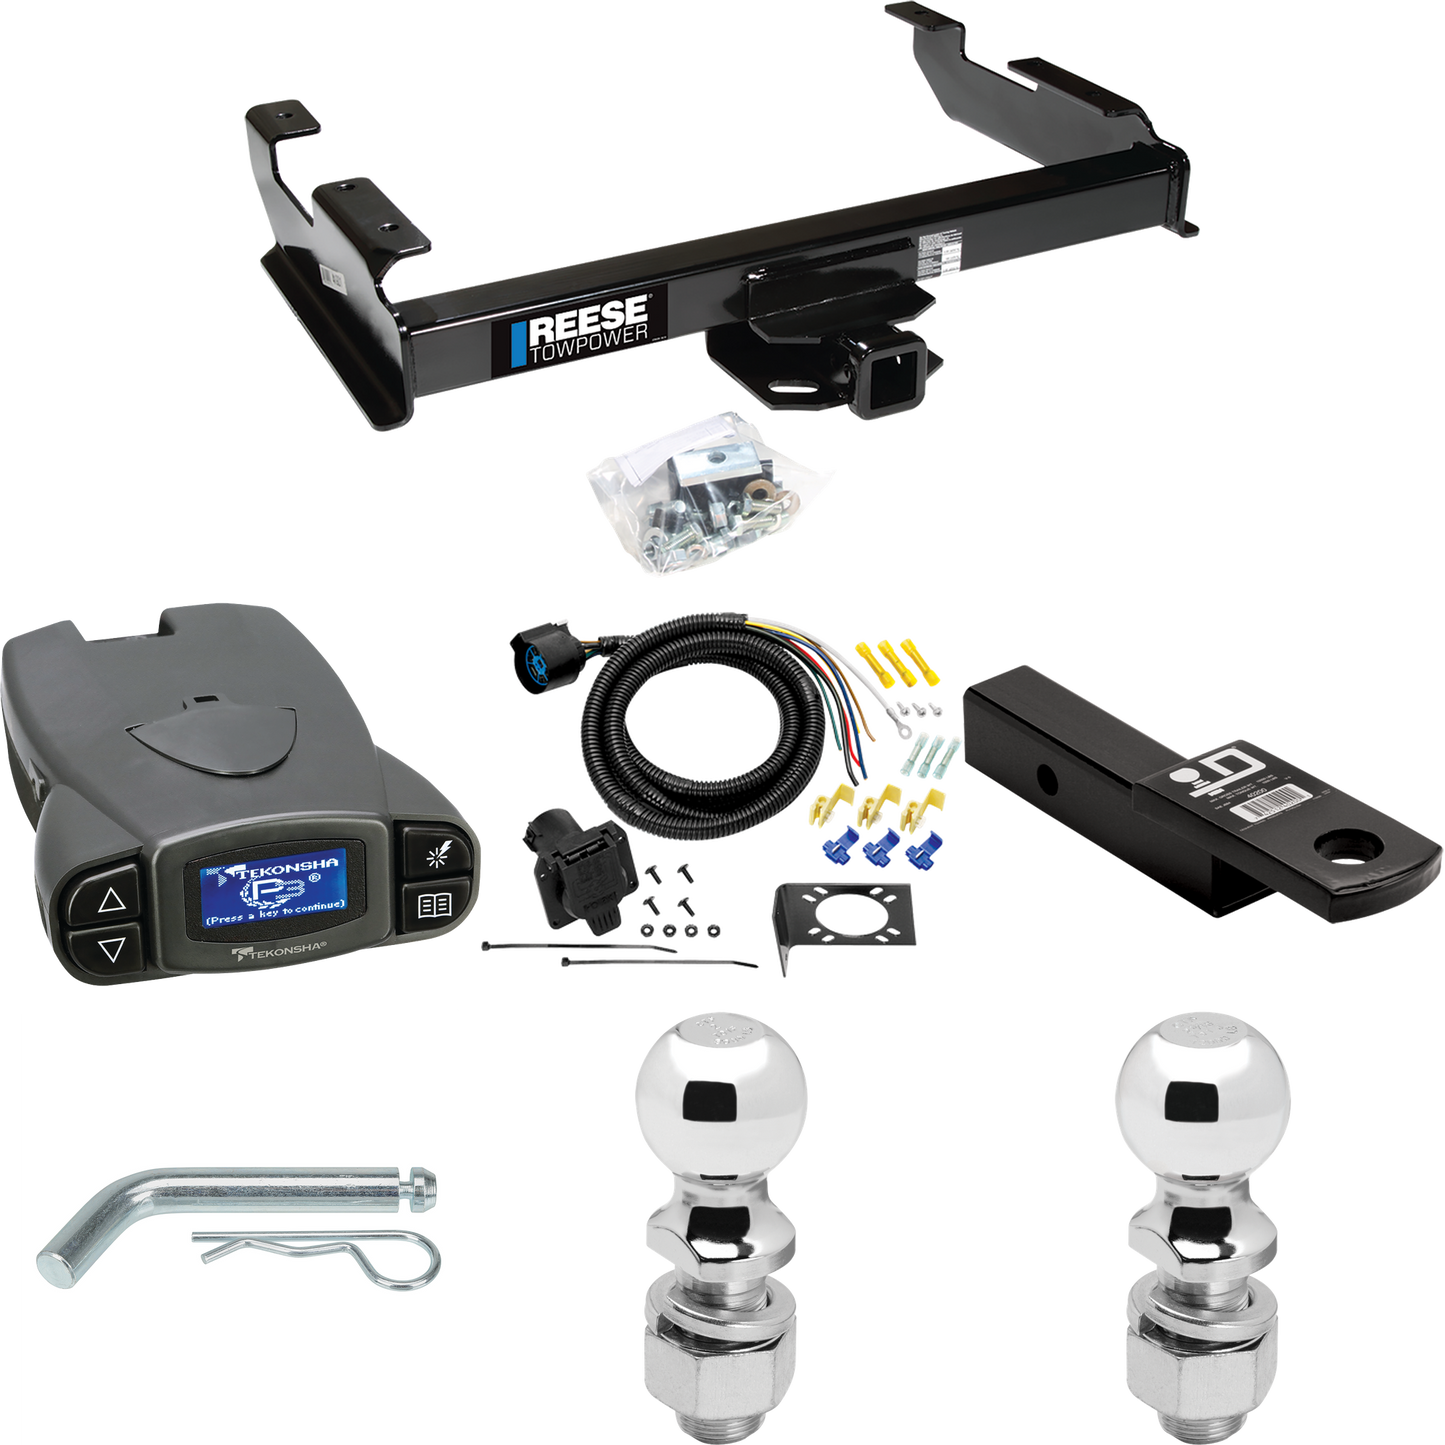 Fits 1988-1999 Chevrolet C1500 Trailer Hitch Tow PKG w/ Tekonsha Prodigy P3 Brake Control + 7-Way RV Wiring + 2" & 2-5/16" Ball & Drop Mount By Reese Towpower